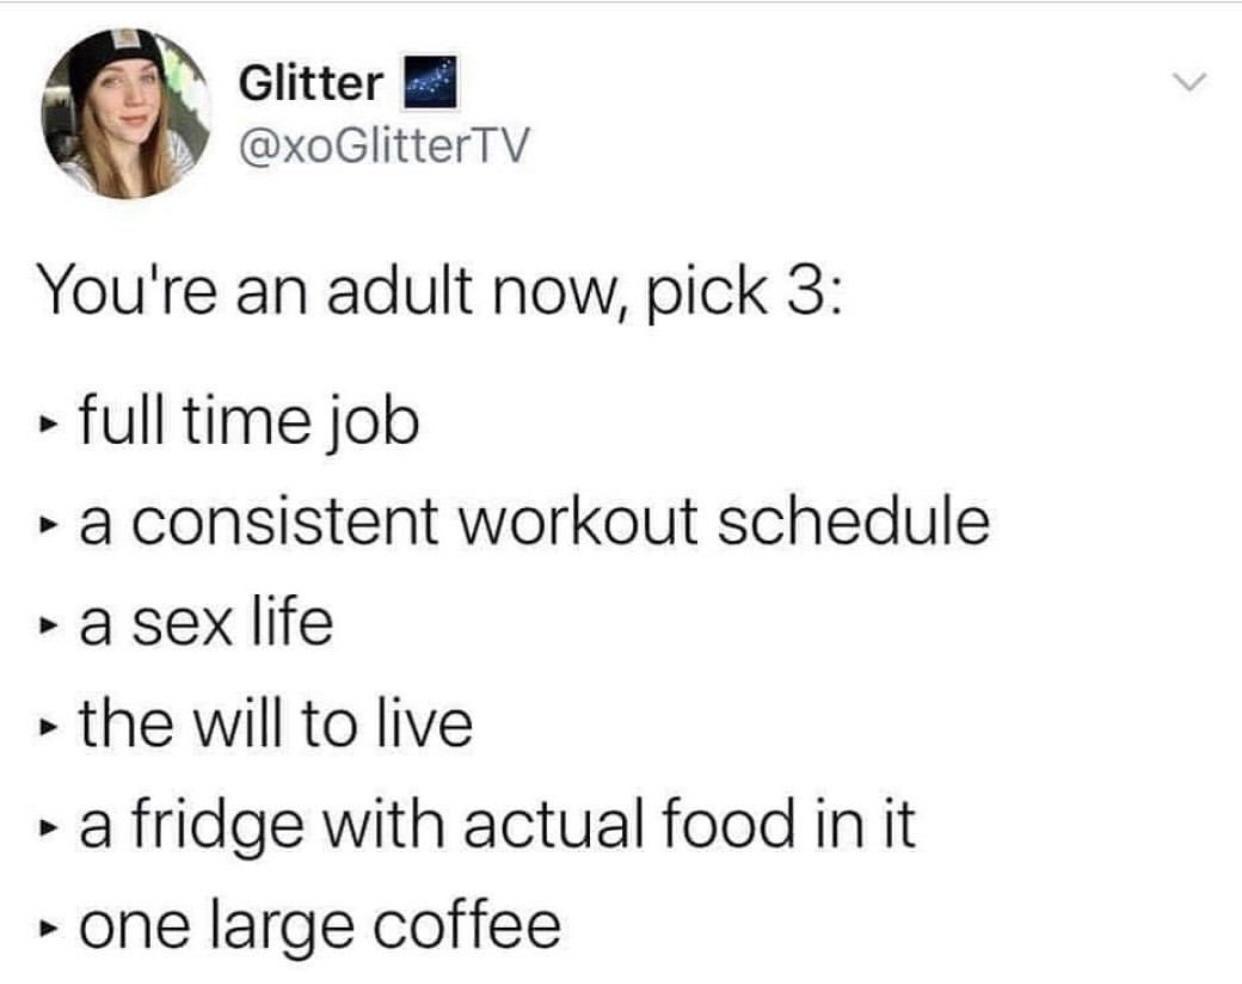 Glitter You're an adult now, pick 3 full time job a consistent workout schedule a sex life the will to live a fridge with actual food in it one large coffee